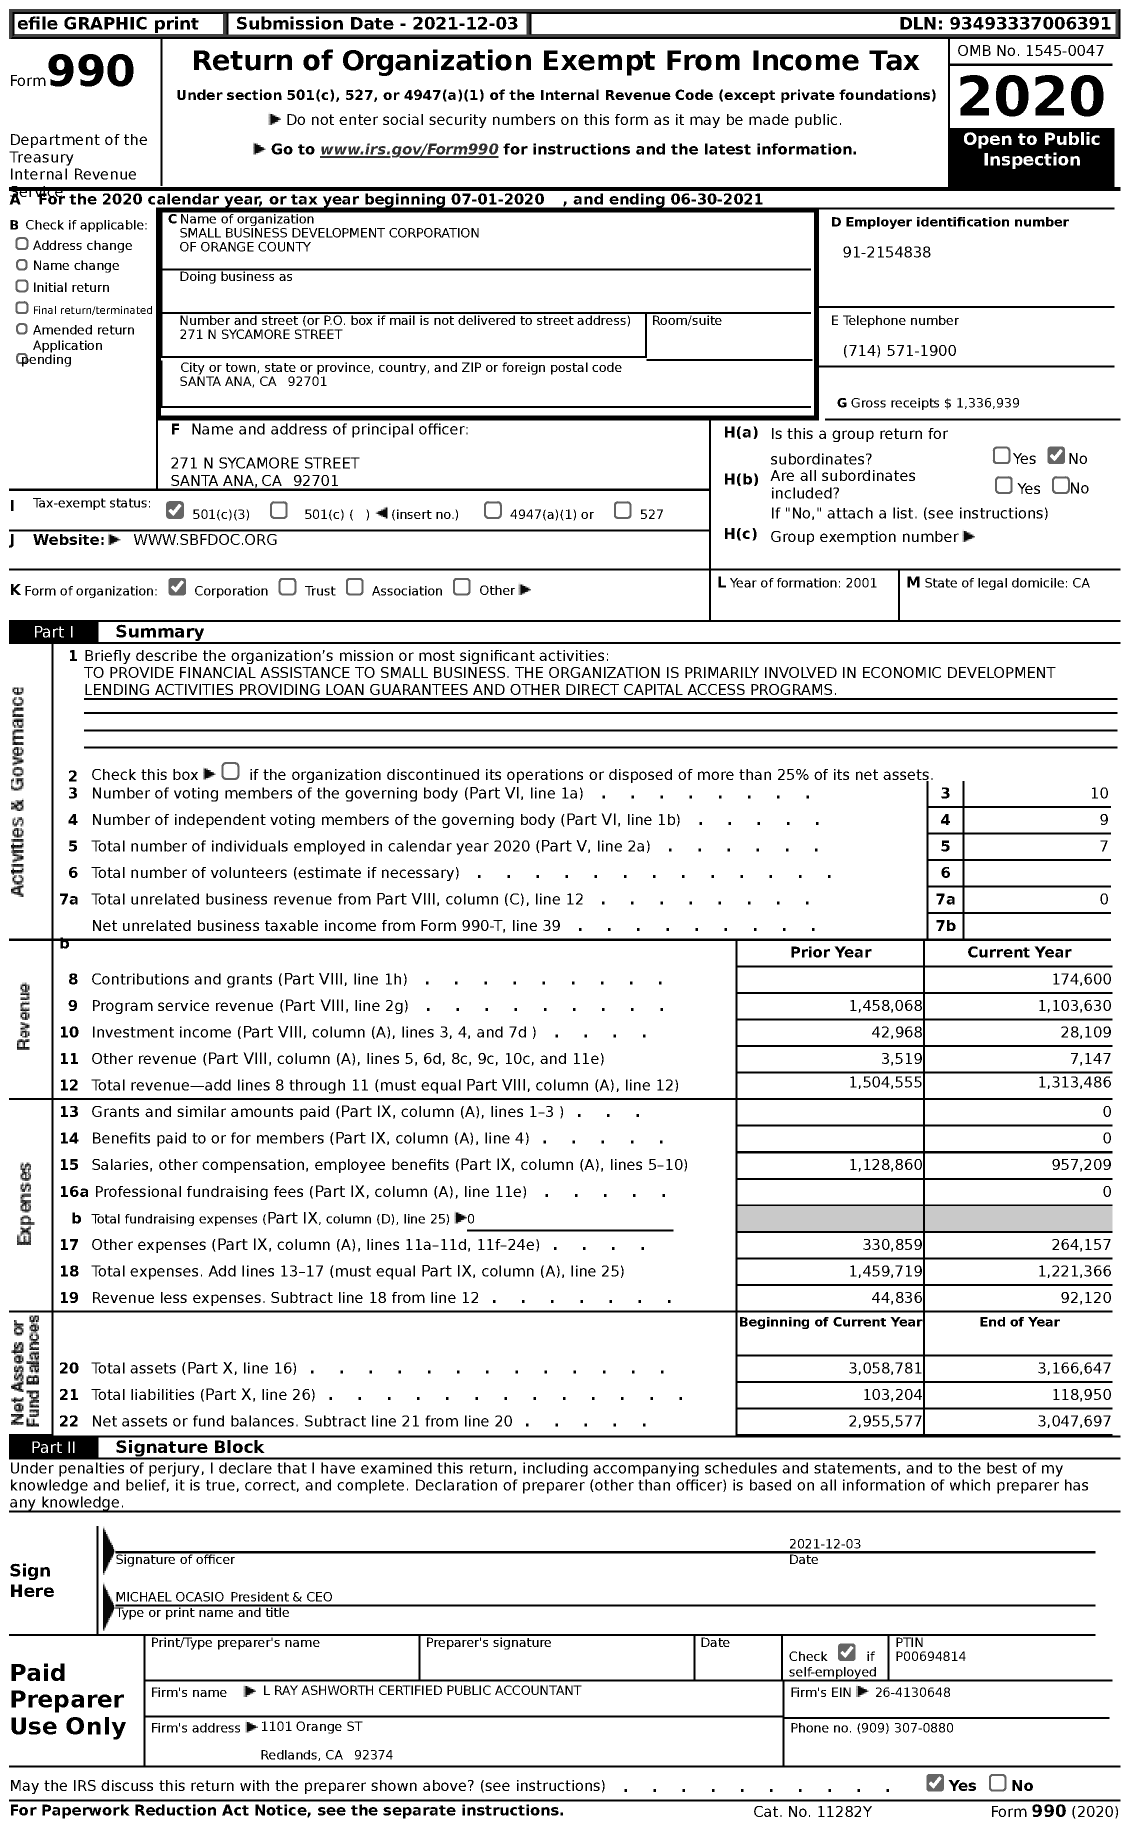 Image of first page of 2020 Form 990 for Small Business Development Corporation of Orange County